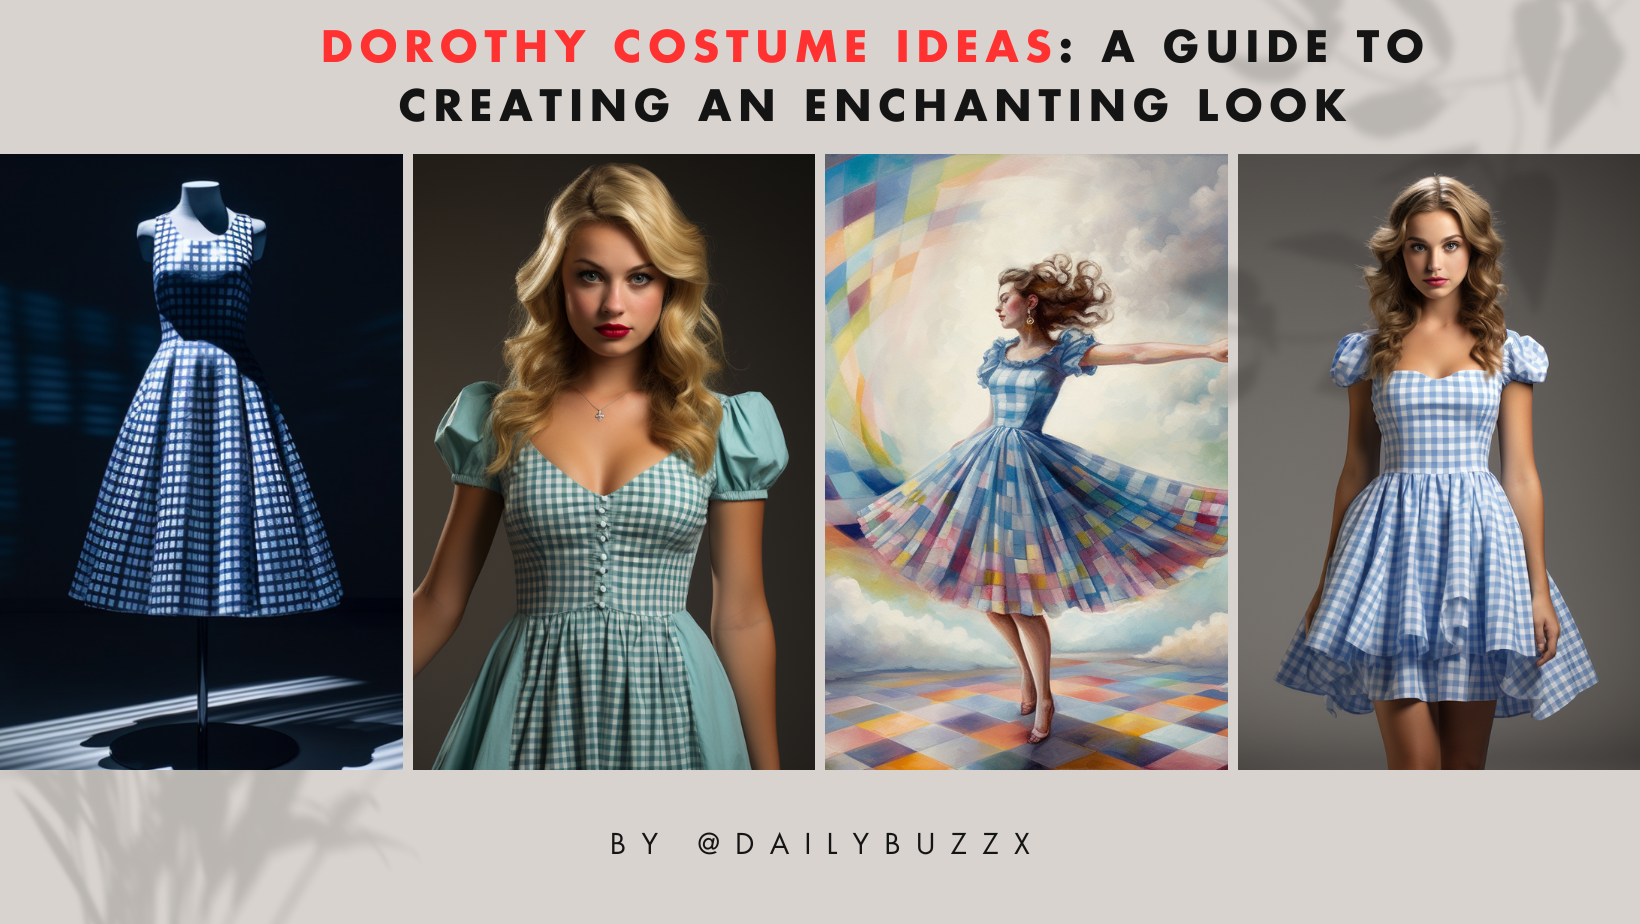 Dorothy Costume Ideas: A Guide to Creating an Enchanting Look